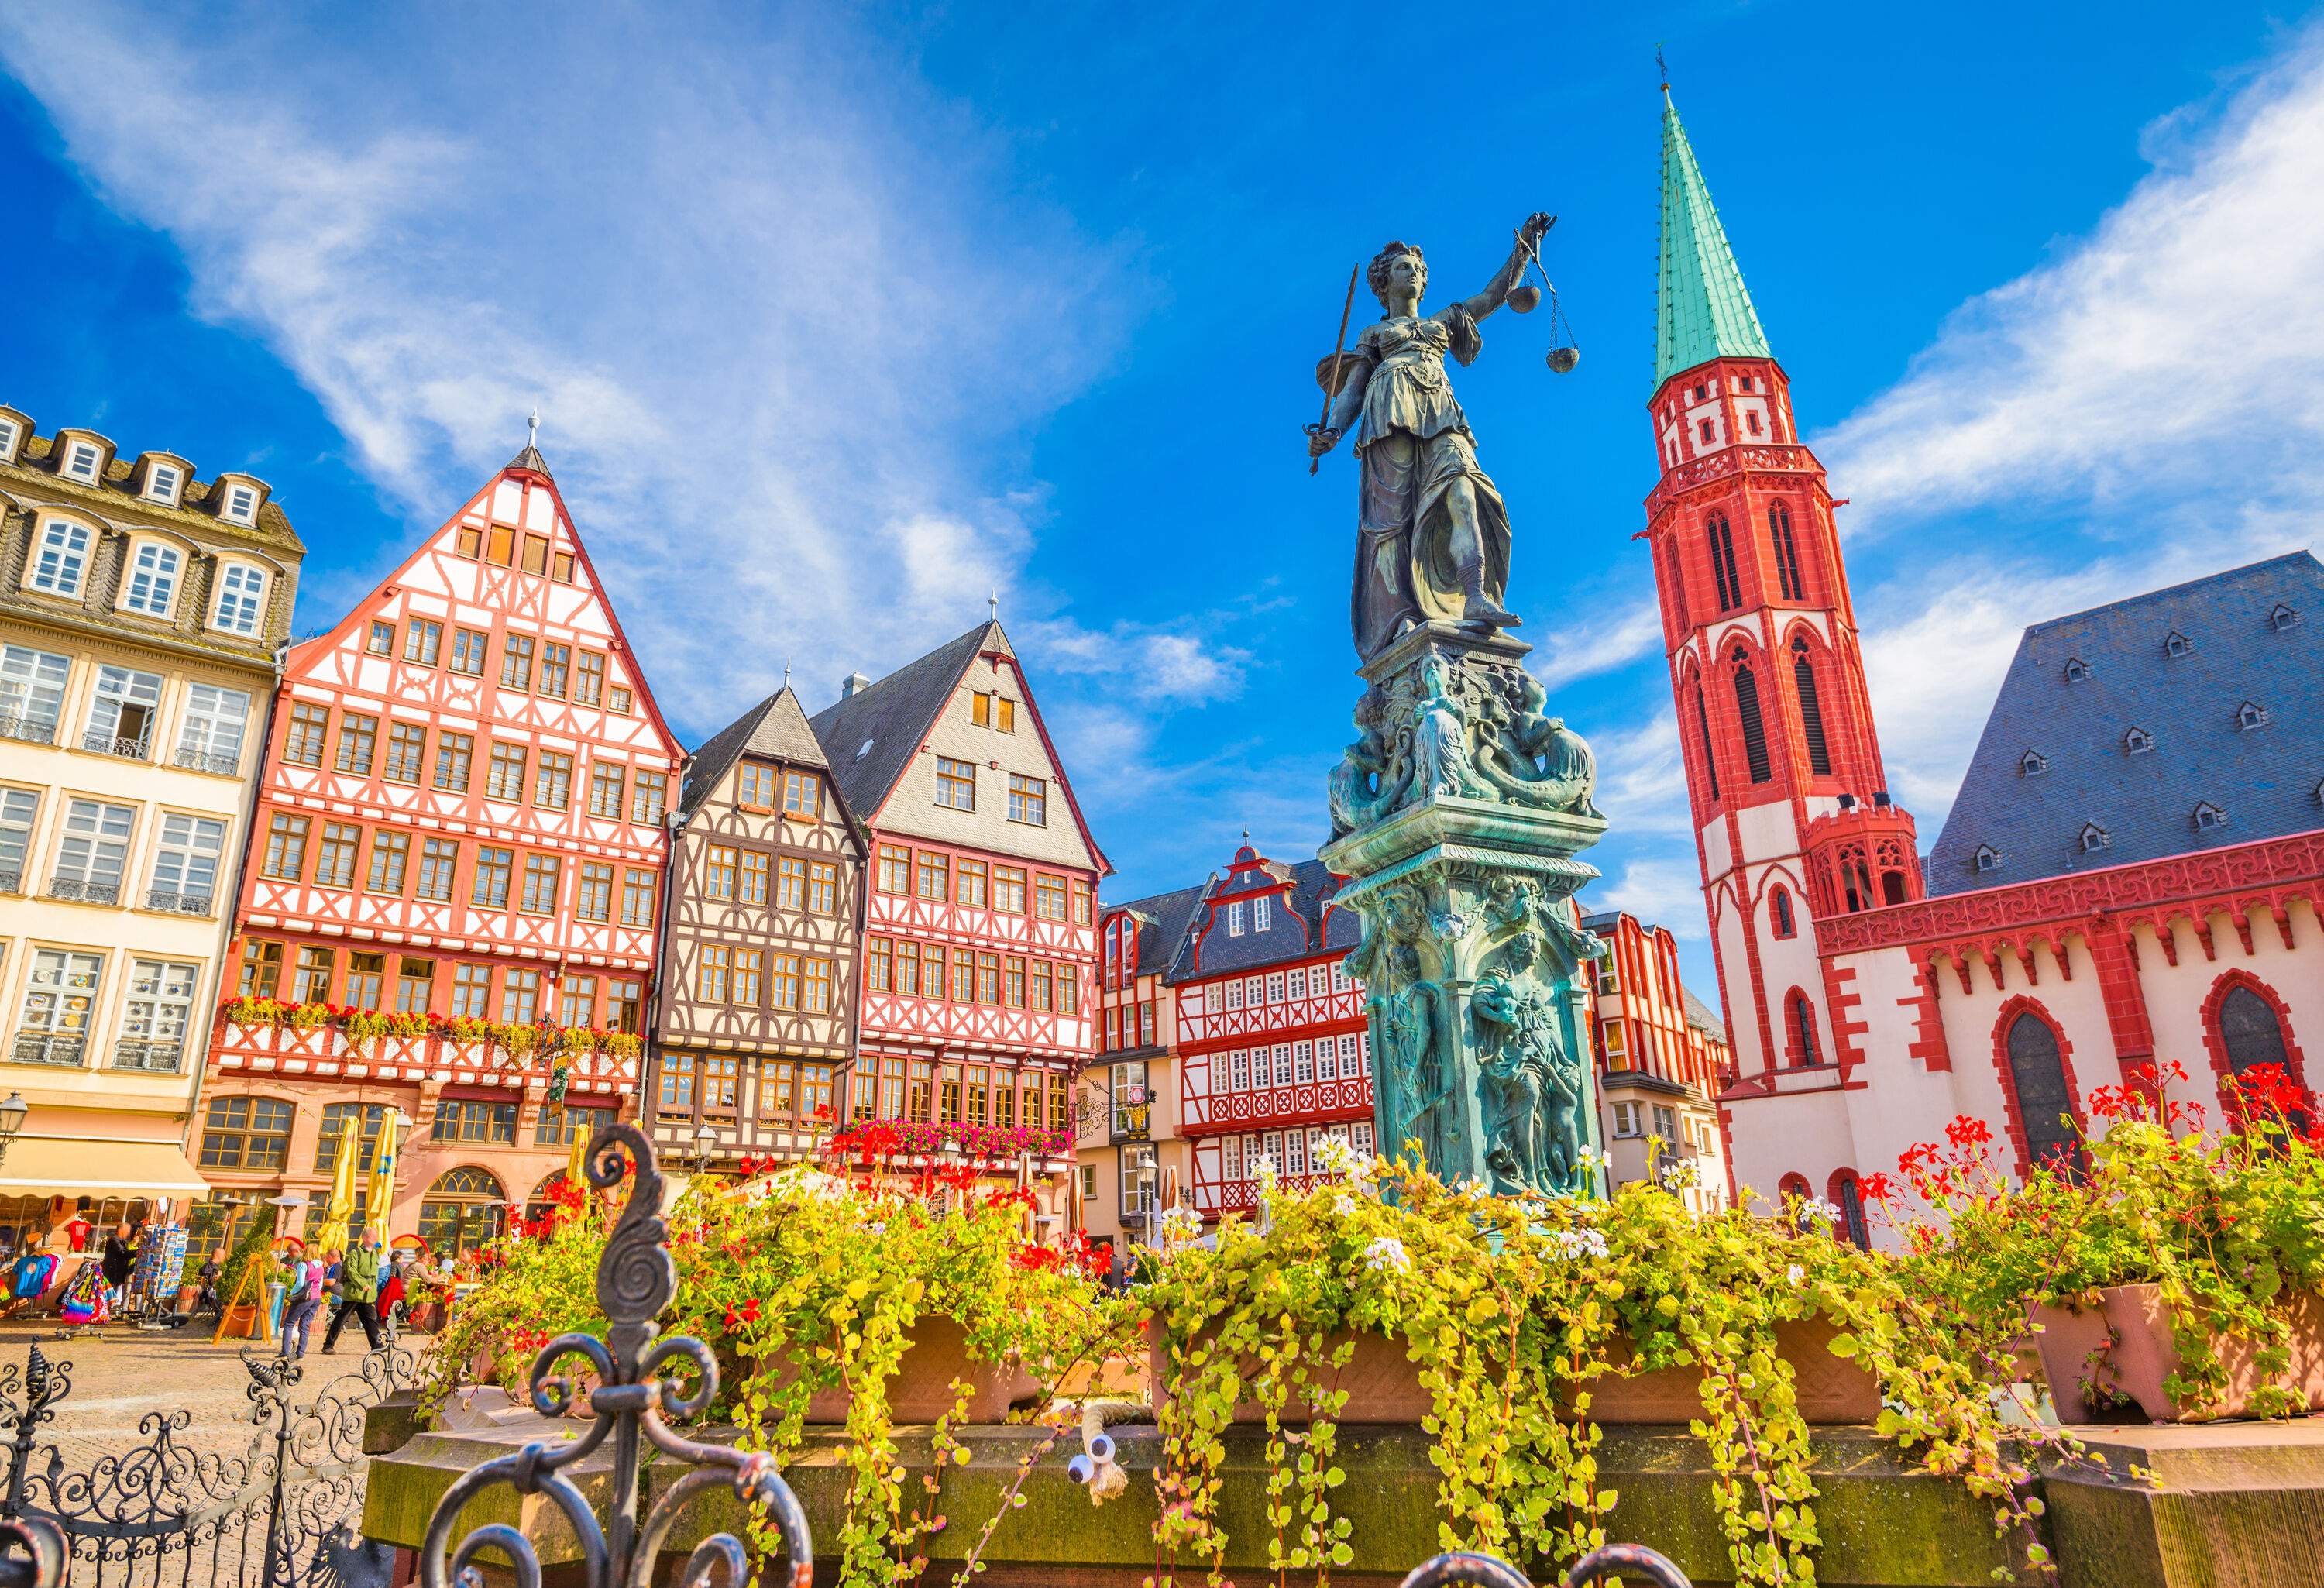 A cobbled town square with a statue in the centre surrounded by half-timbered ornate and colourful townhouses and a small brick gothic church with a towering spire.